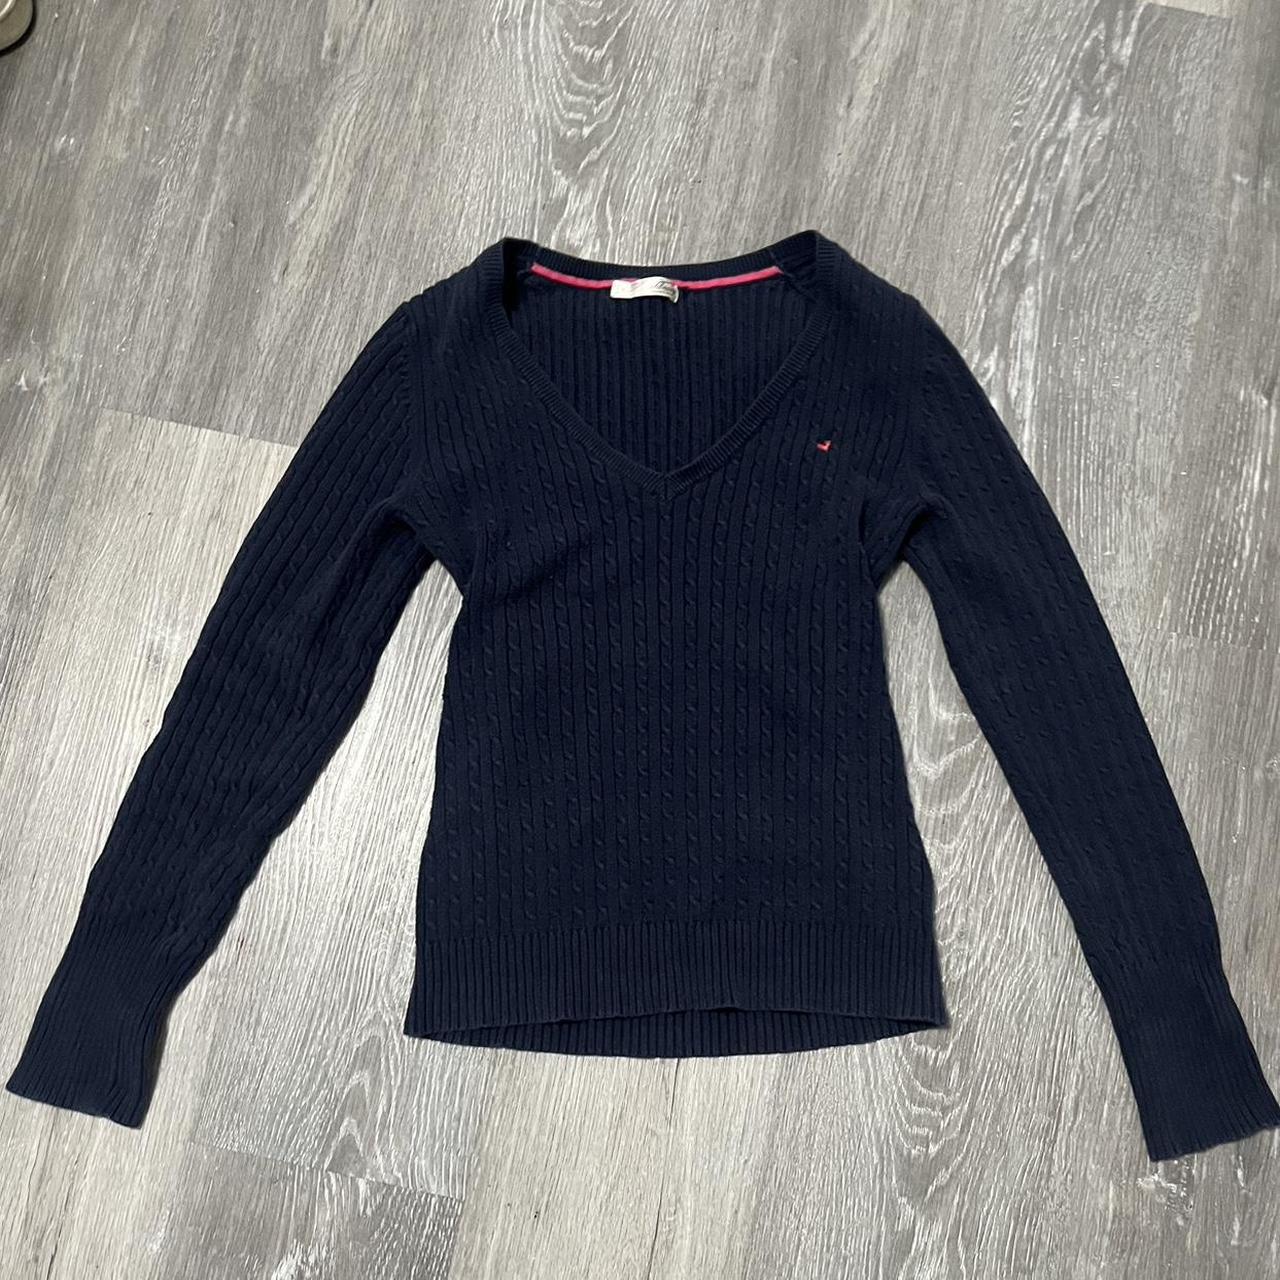 old navy perfect fit sweater - Depop